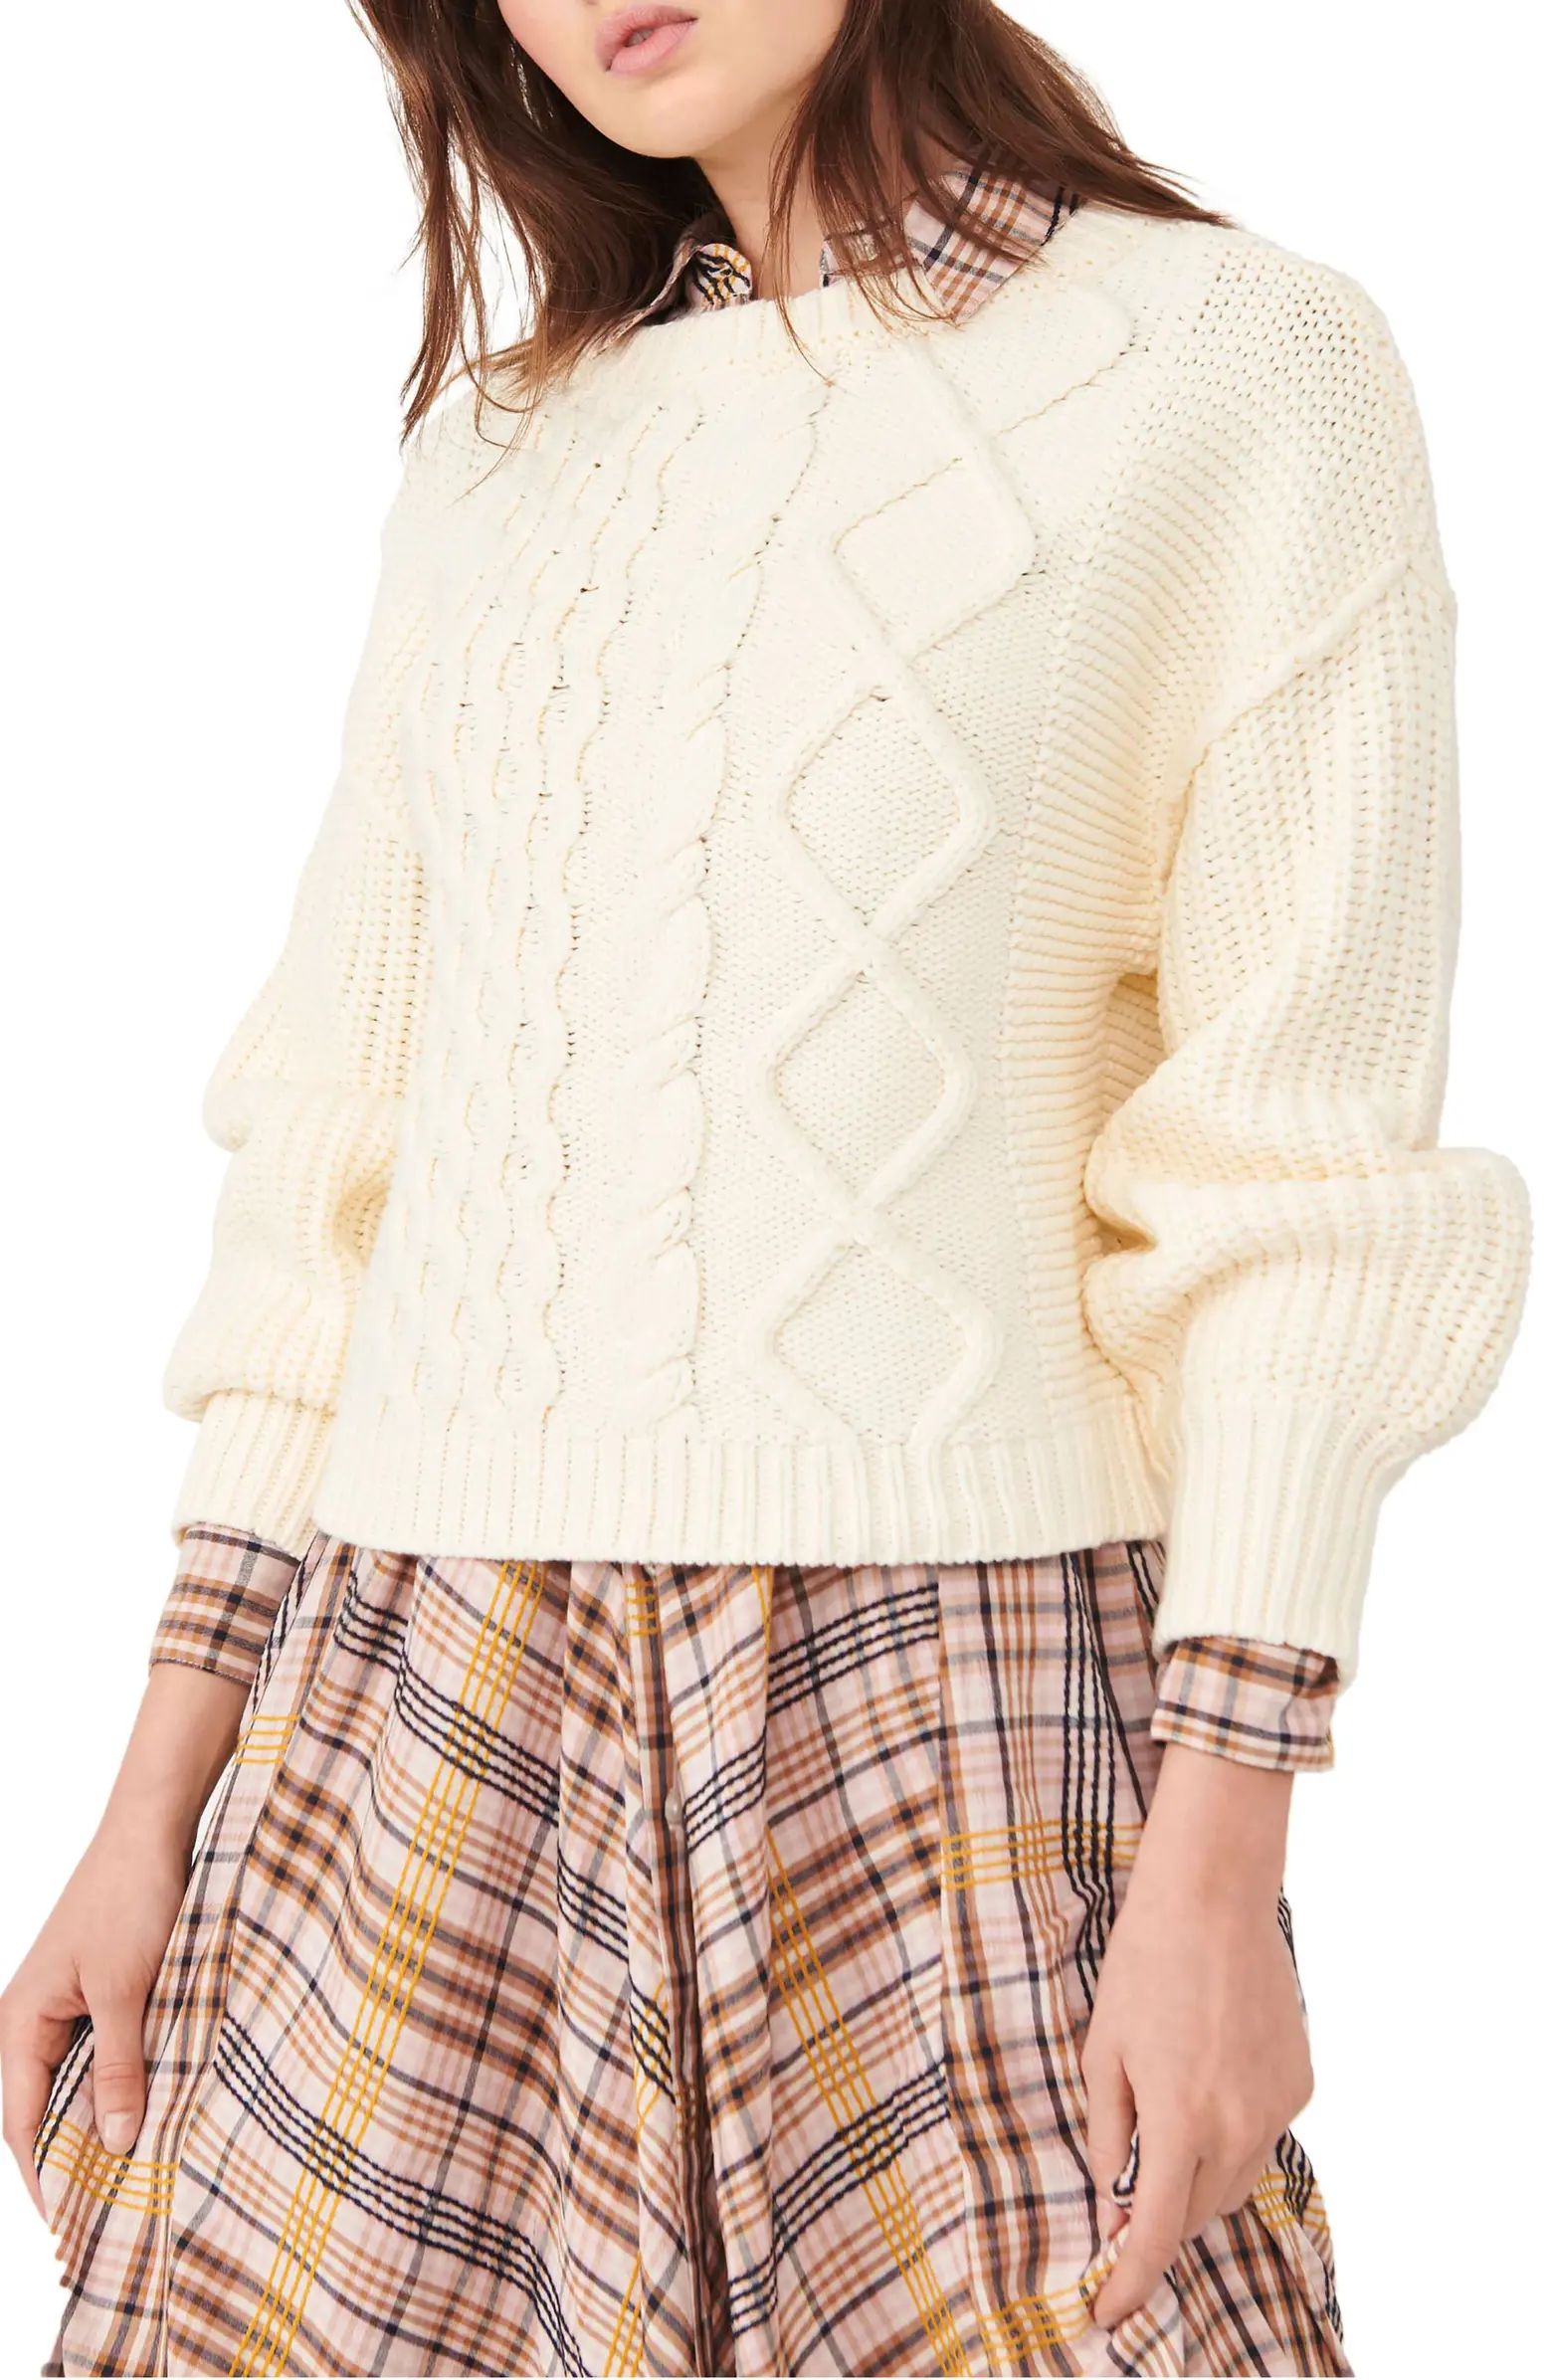 Dream Cable Crewneck Sweater | Nordstrom